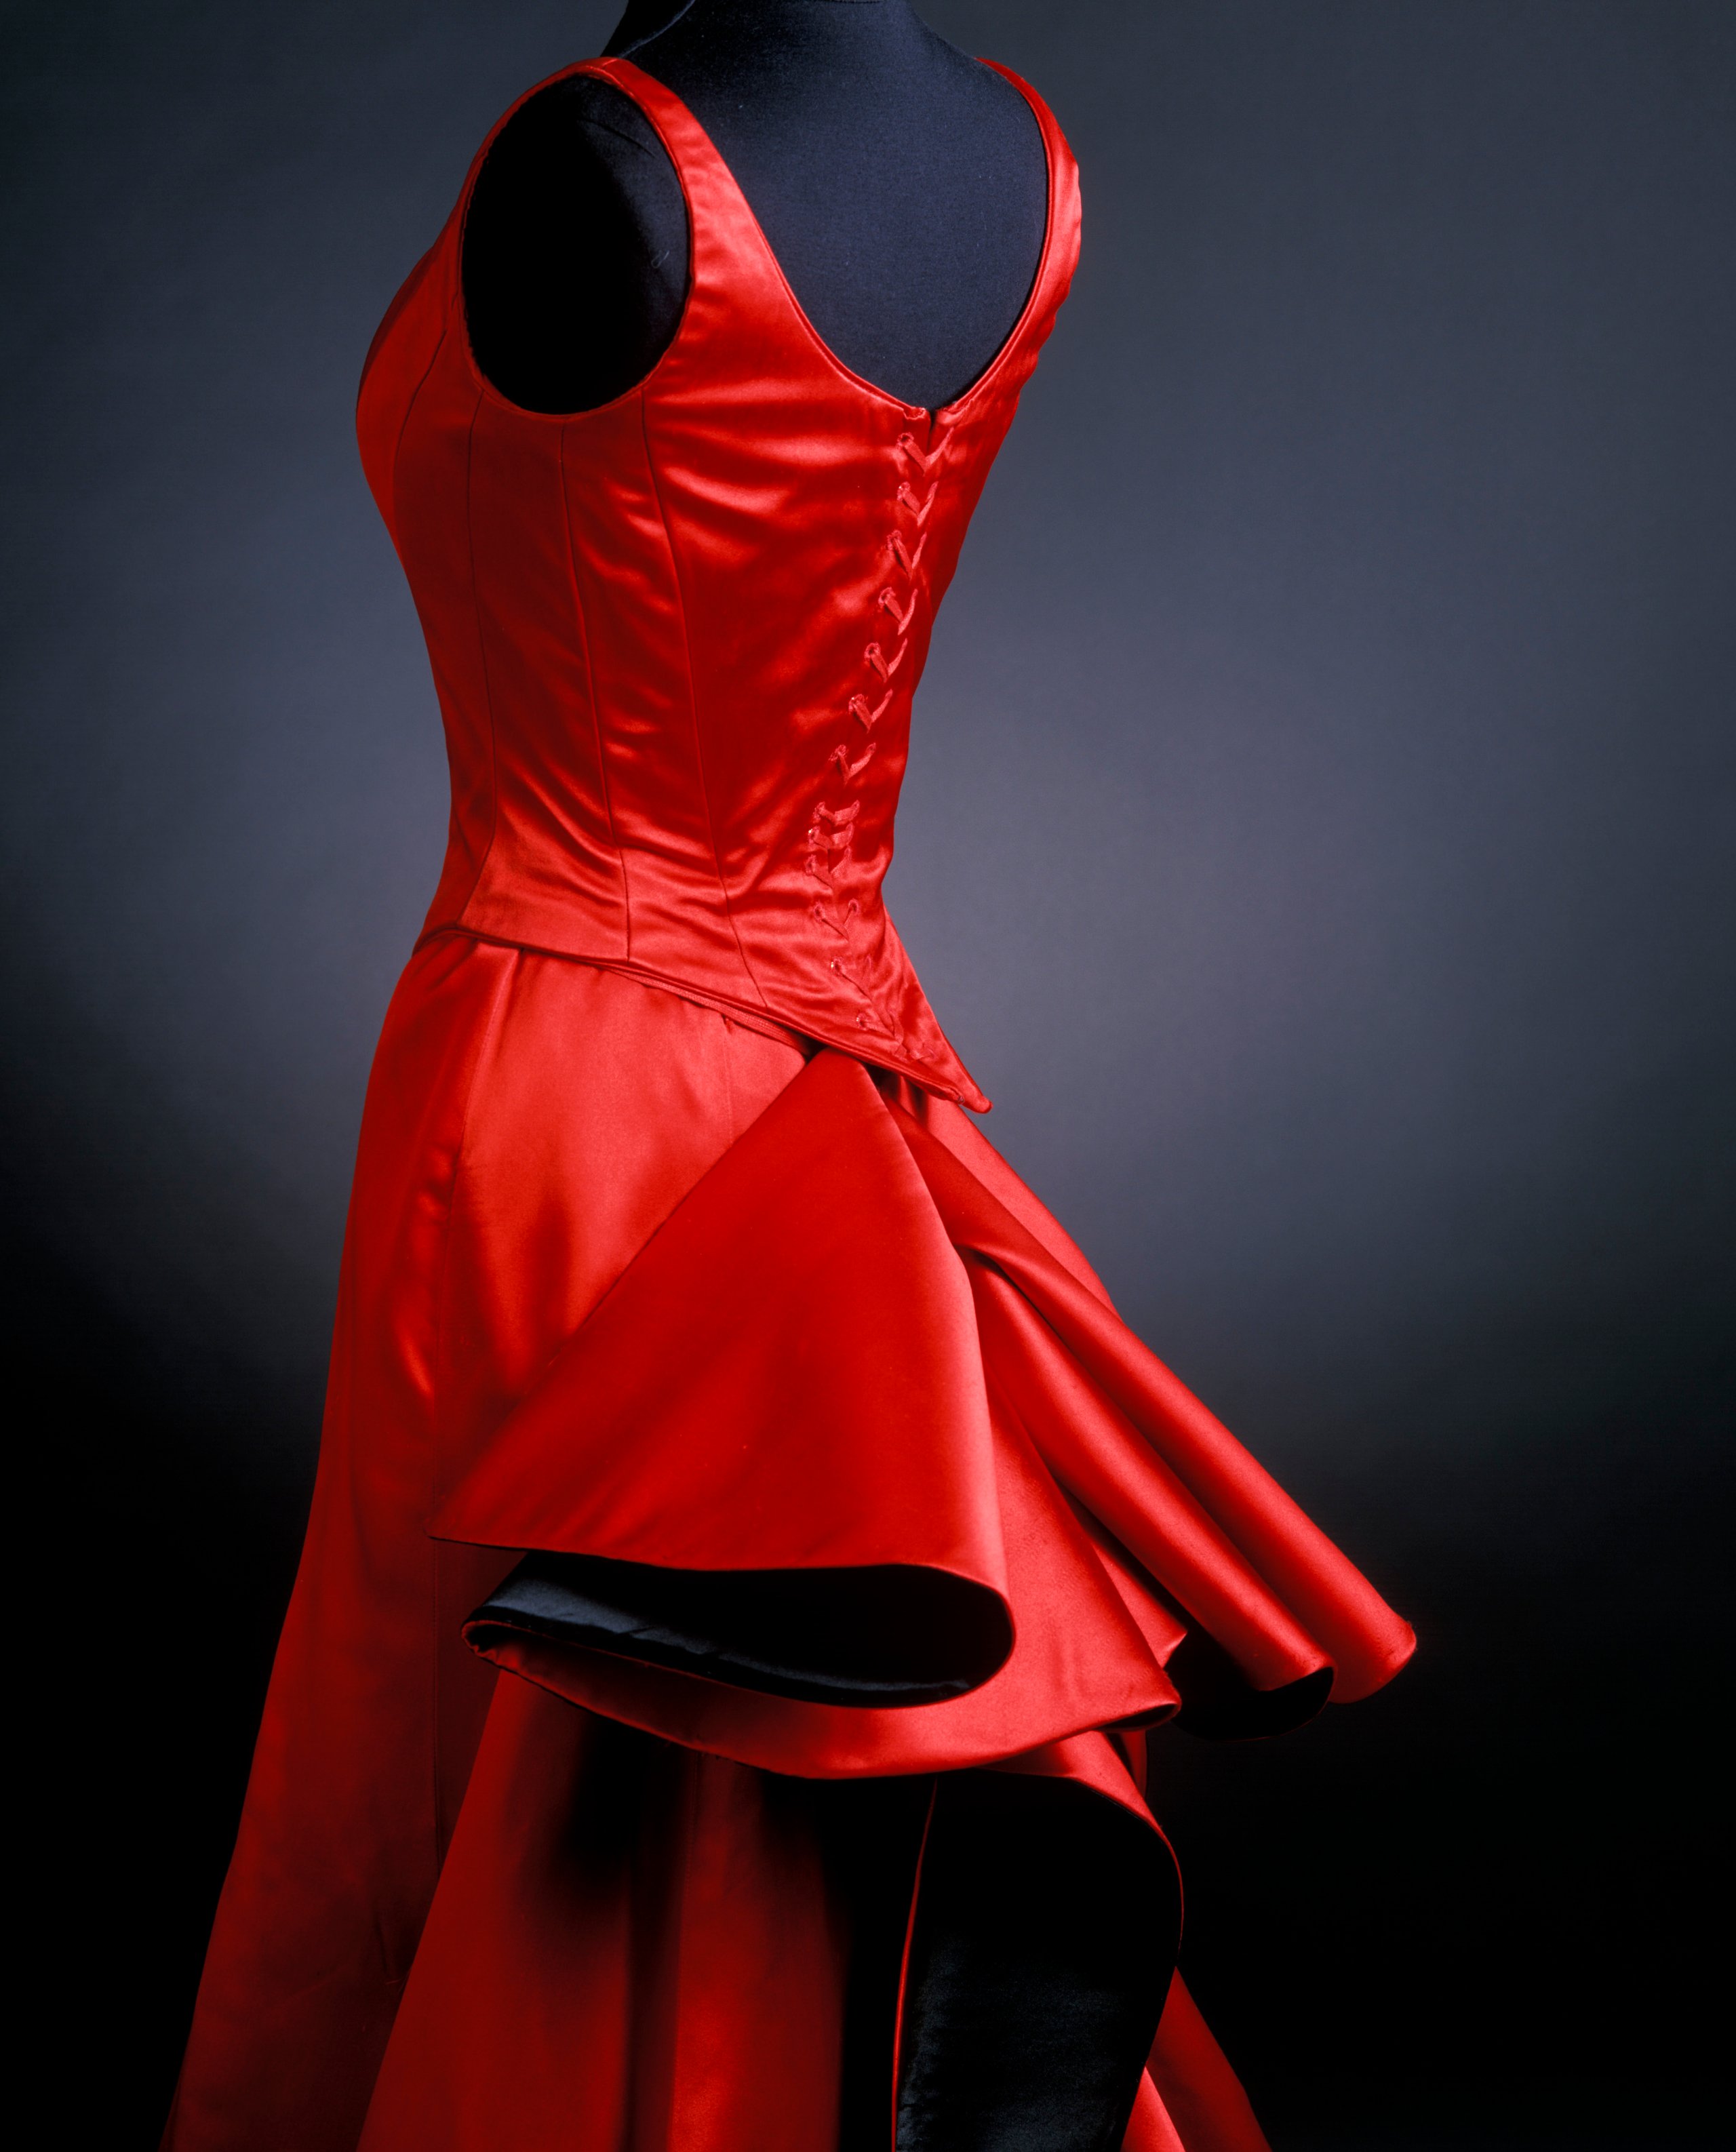 Powerhouse Collection - 'Red Satin' costume from the film 'Moulin Rouge'